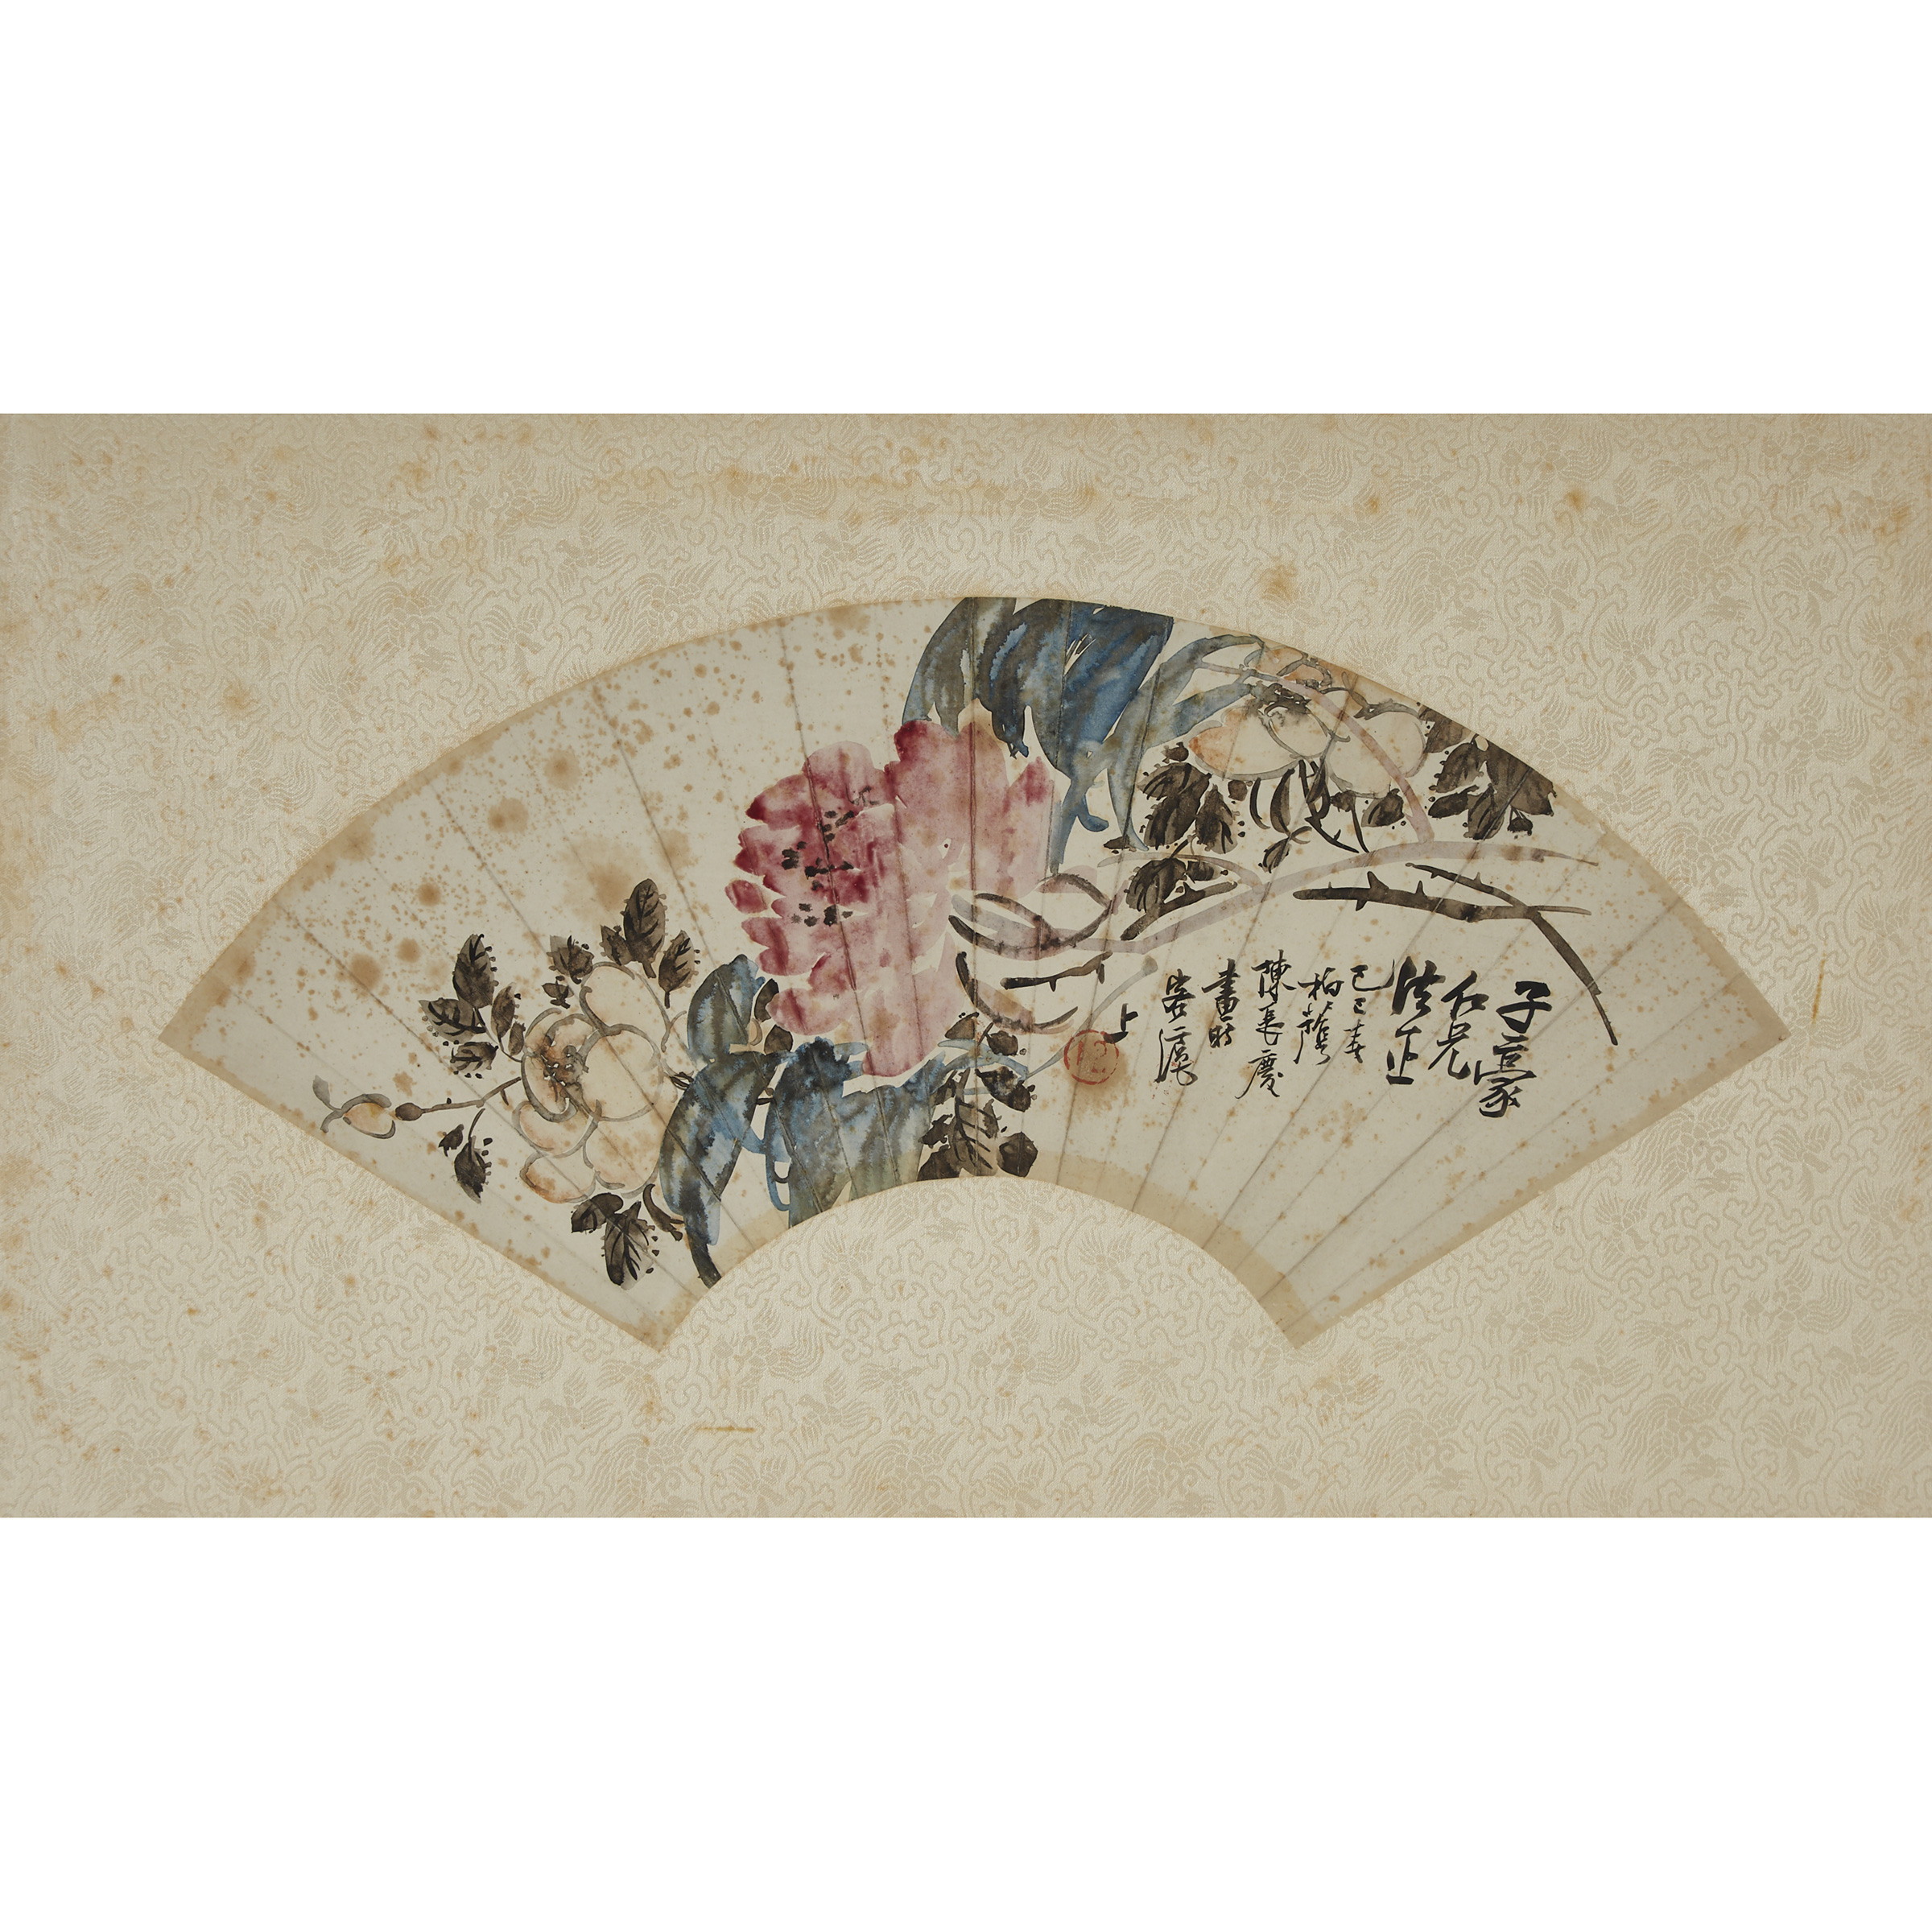 Two Fan Paintings of a Landscape and Flowers, Late Qing/Early Republican Period 